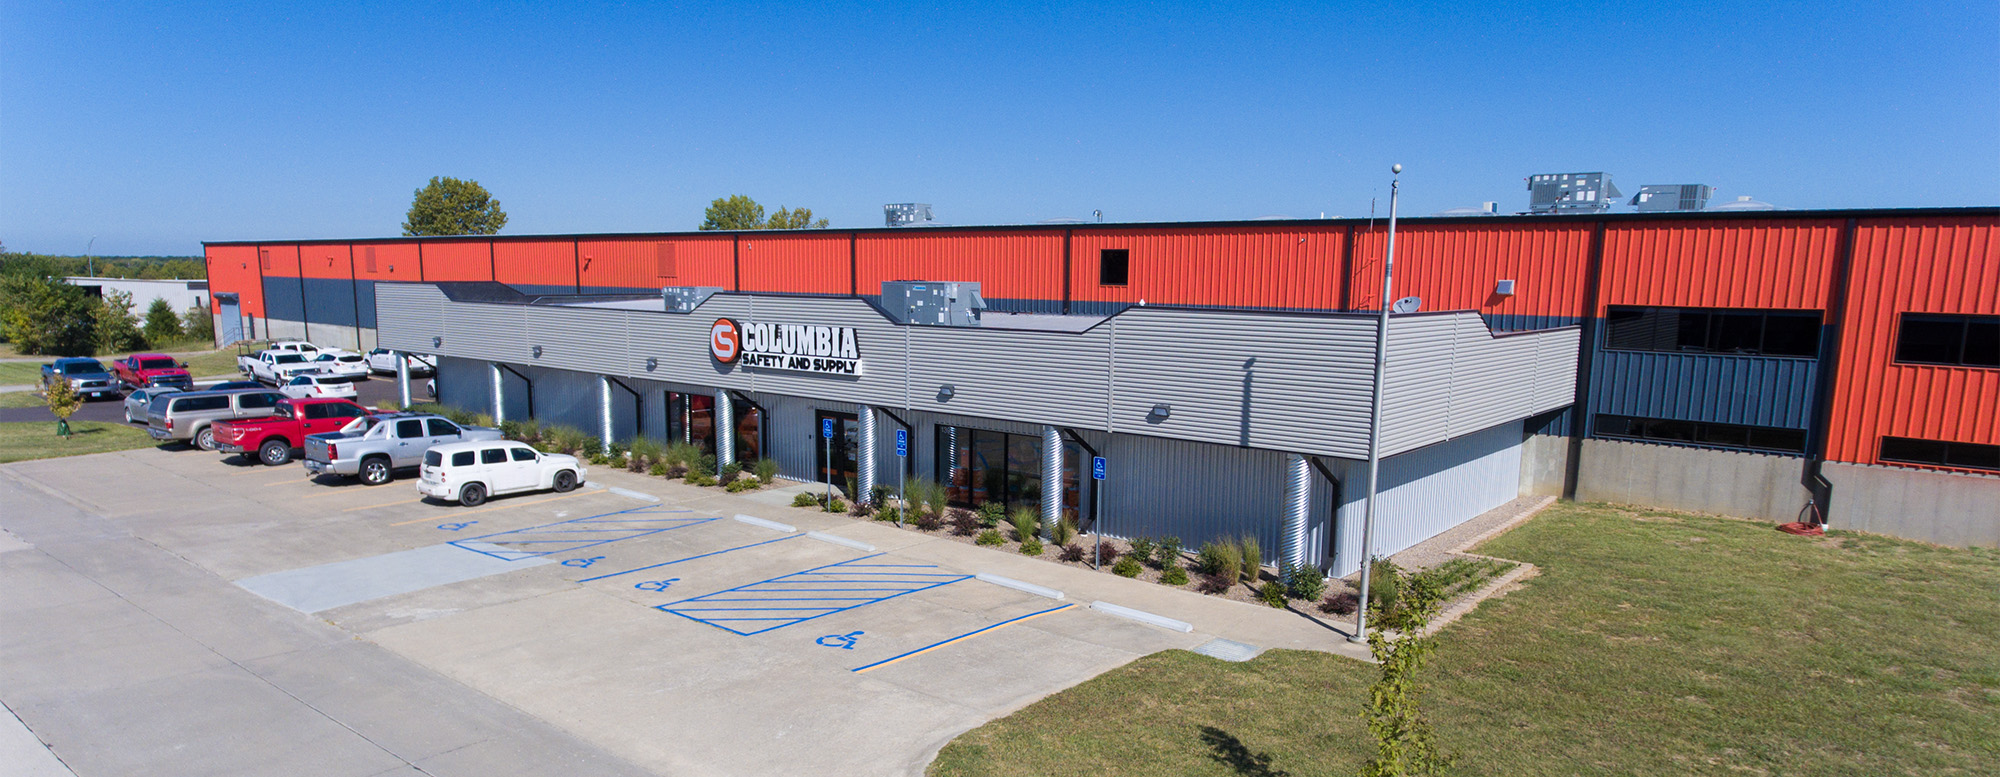 Columbia Safety and Supply's Global Flagship Store located in Columbia, MO